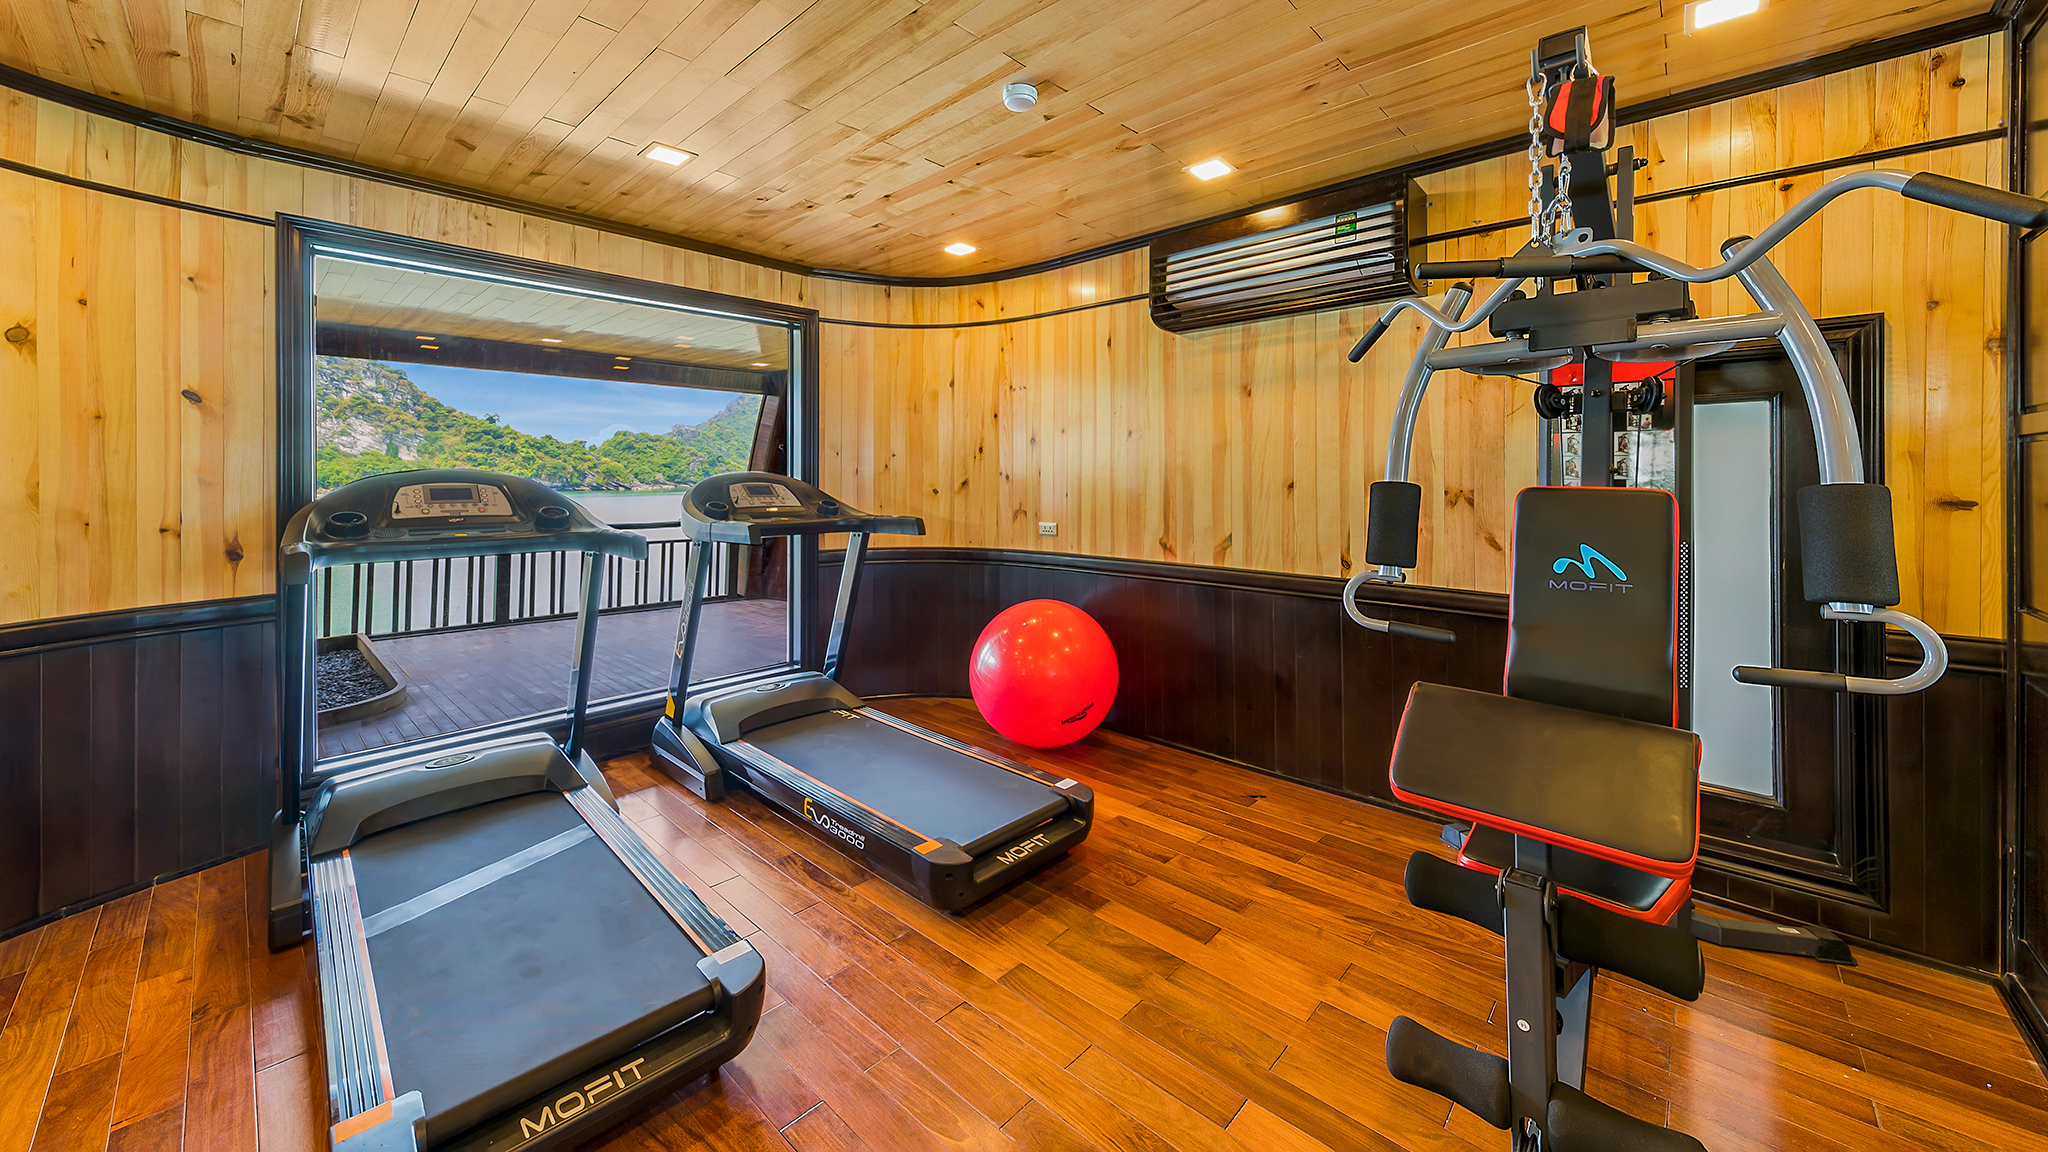 Gym room with the bay view